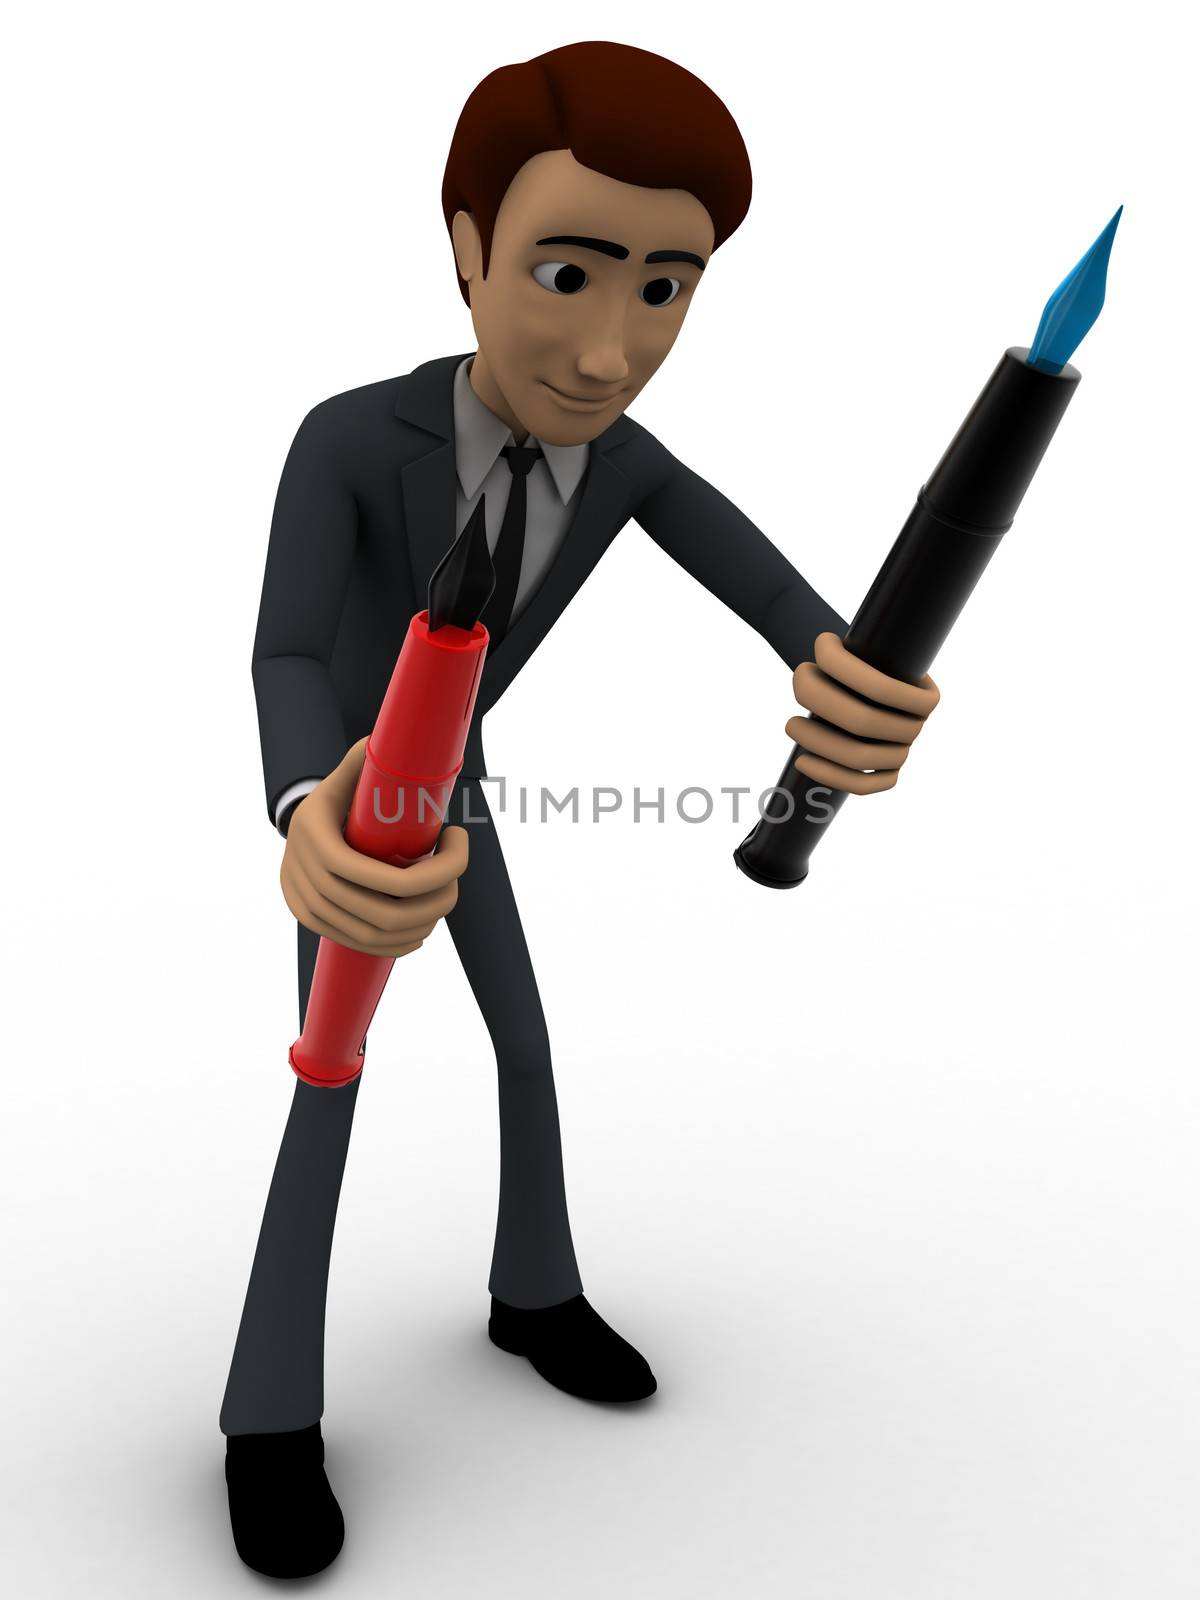 3d man can not choose from black and red pen concept by touchmenithin@gmail.com